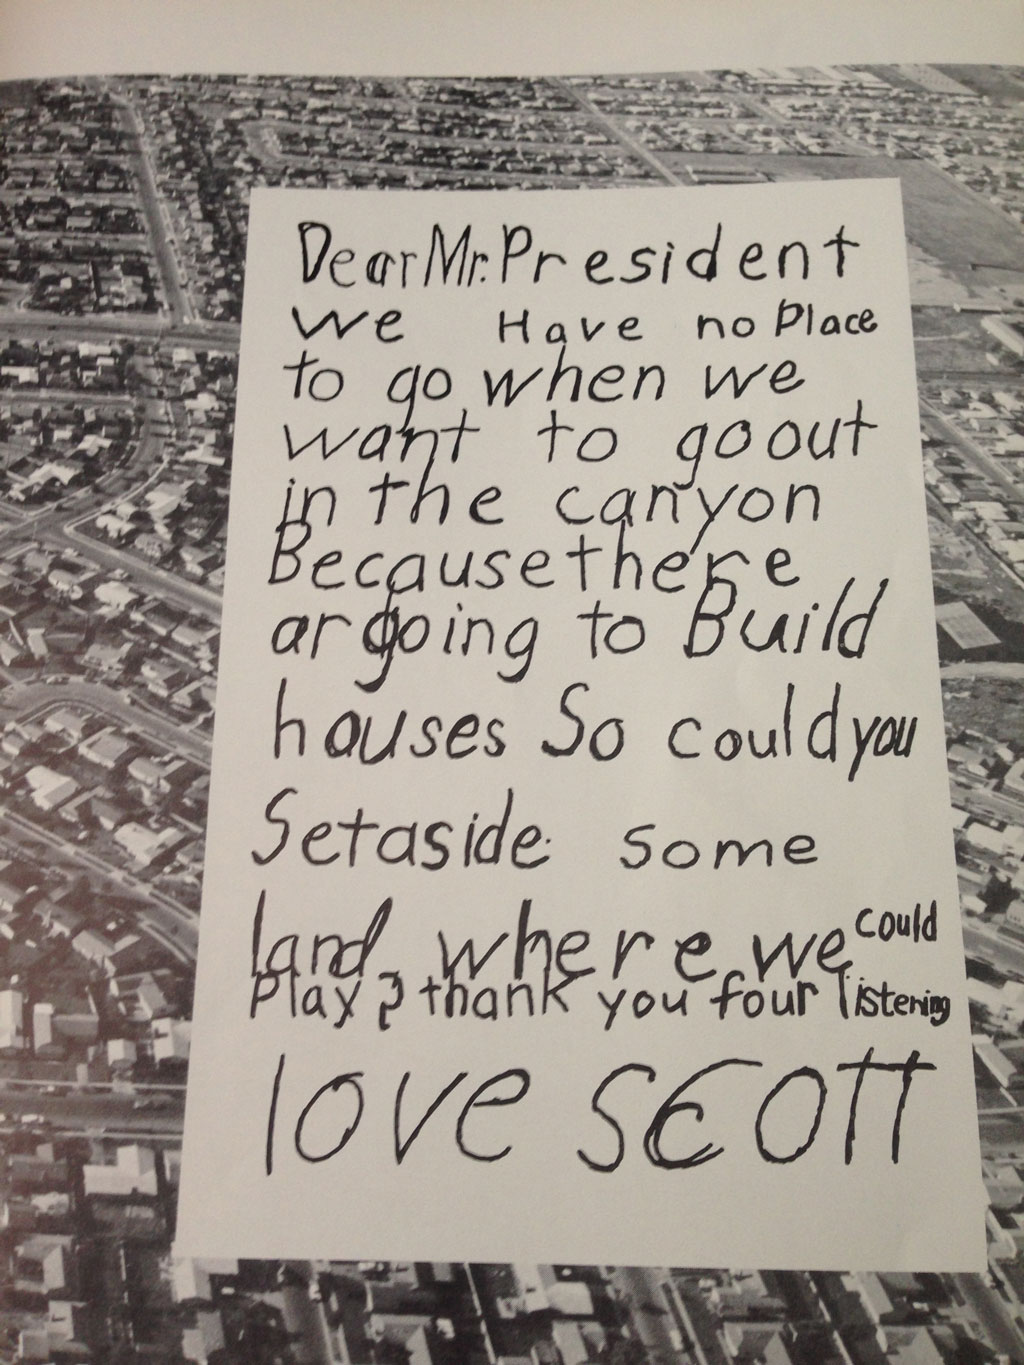 The Scott Turner letter. Jean’s response on behalf of Udall said: “Dear Scott. . . We are trying as hard as we can, President Kennedy and I, to do just what you asked—‘to set aside some land’ where you can play—not in groups with supervision, but just roaming around by yourself and finding out how you relate to the earth and the sky. . .”